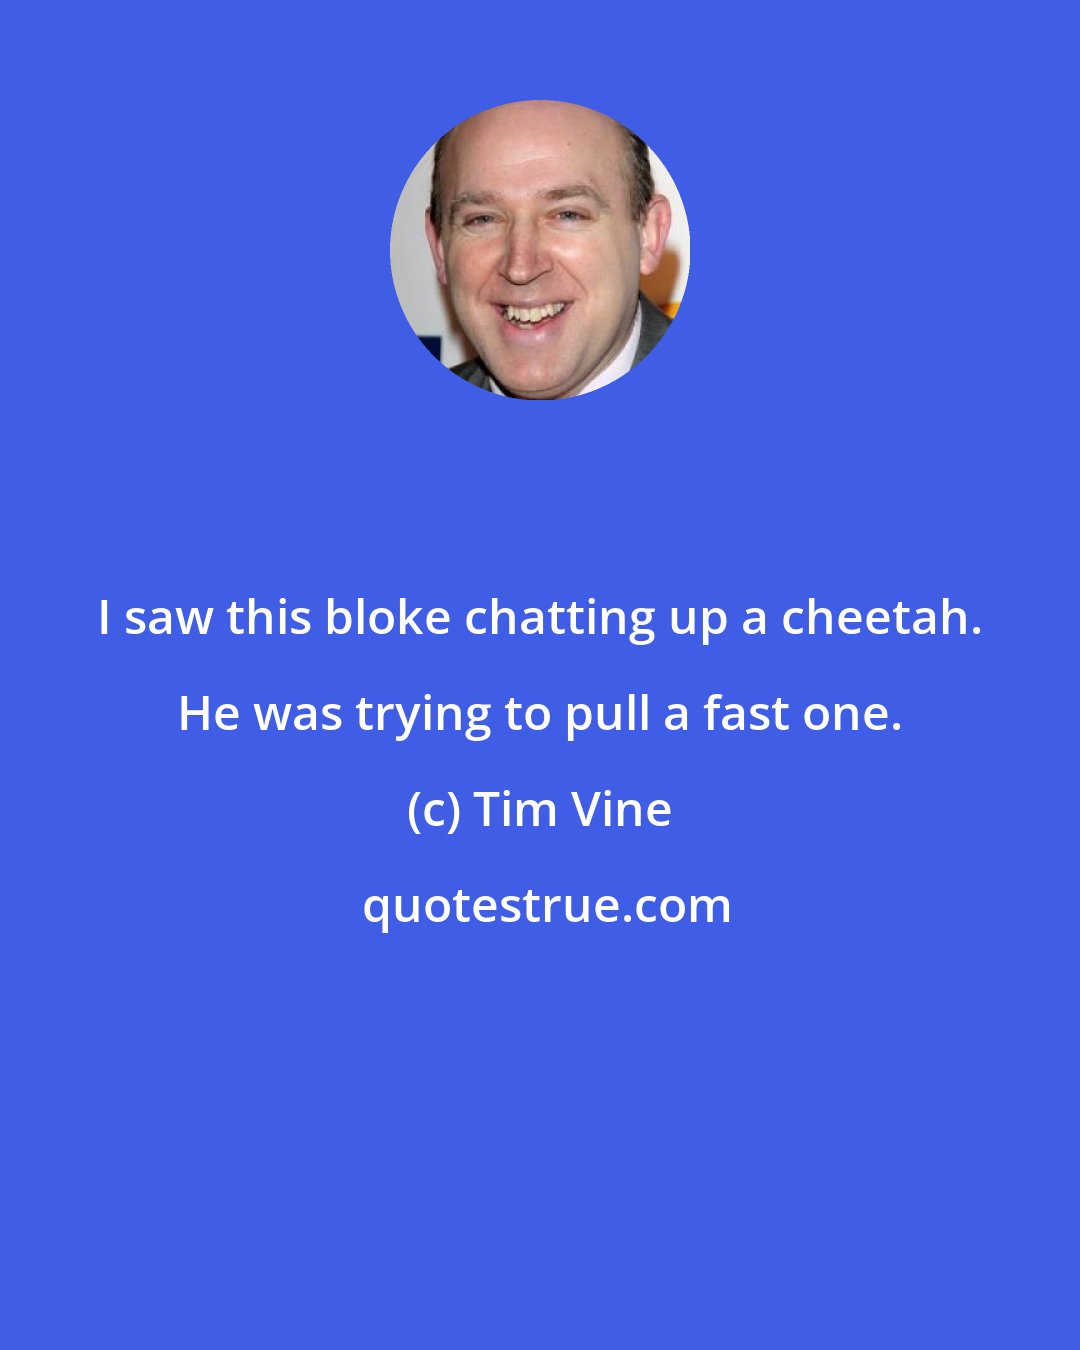 Tim Vine: I saw this bloke chatting up a cheetah. He was trying to pull a fast one.